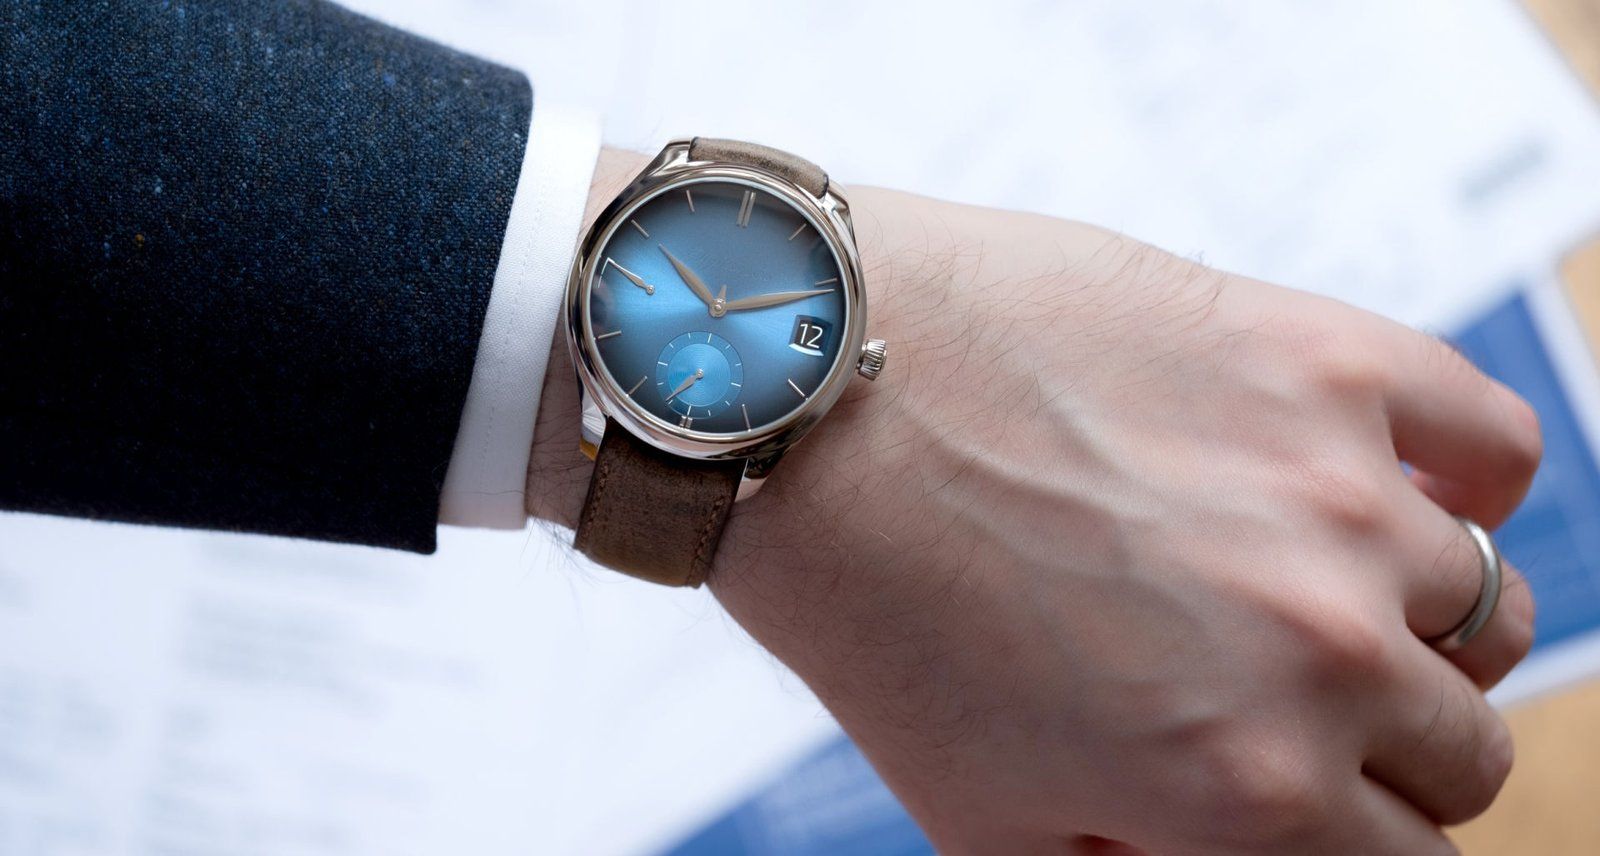 H.Moser & Cie’s Endeavour Perpetual Calendar Funky Blue: Simple As A Child’s Play